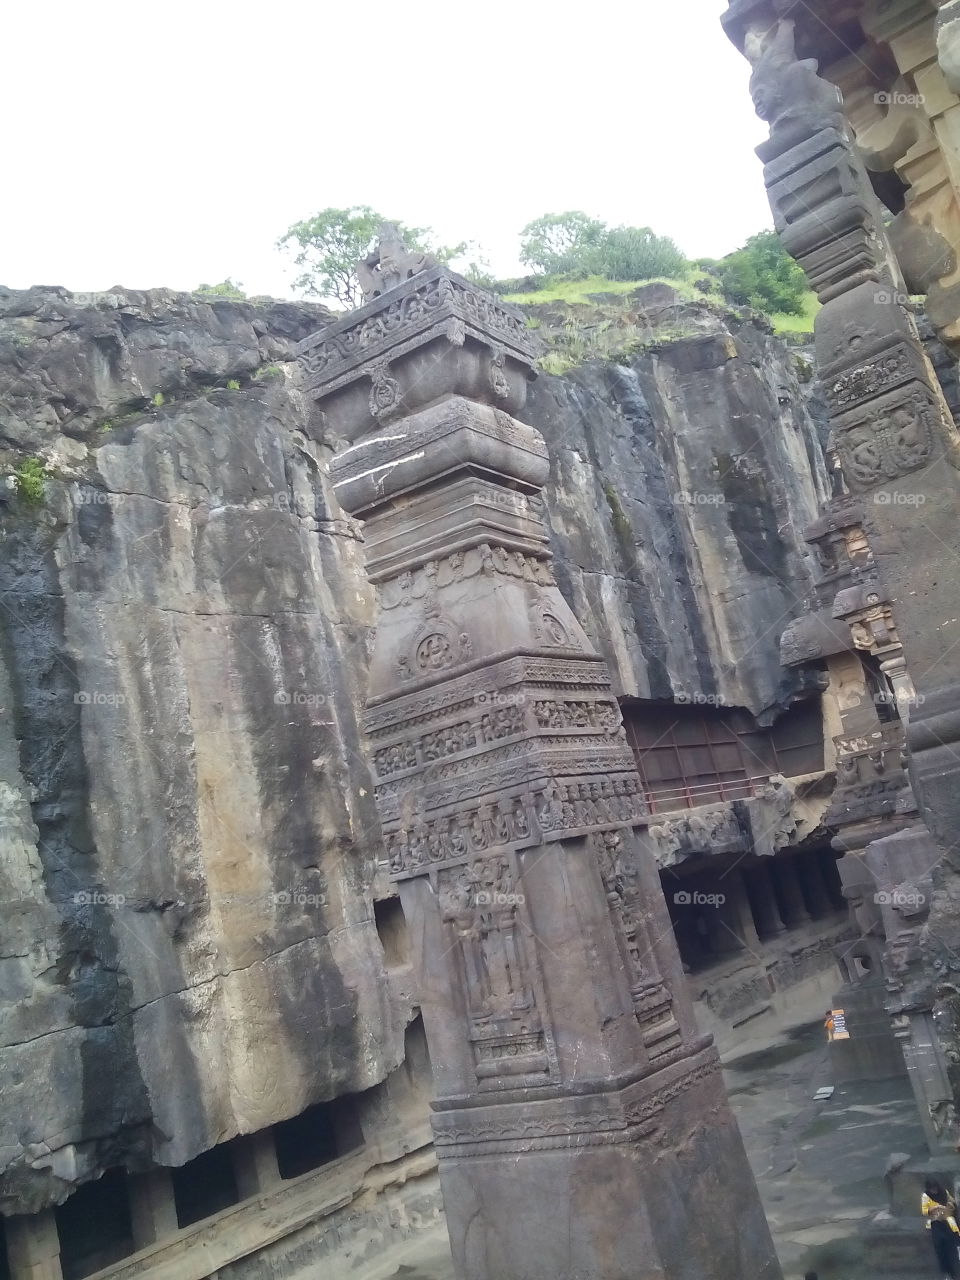 Ancient Cave of India- Ellora
Excavated between 500 A.D. to 700 A.D.
The Kailash temple
Cave no 16
inside picture of a minar 
The symbol of Glory